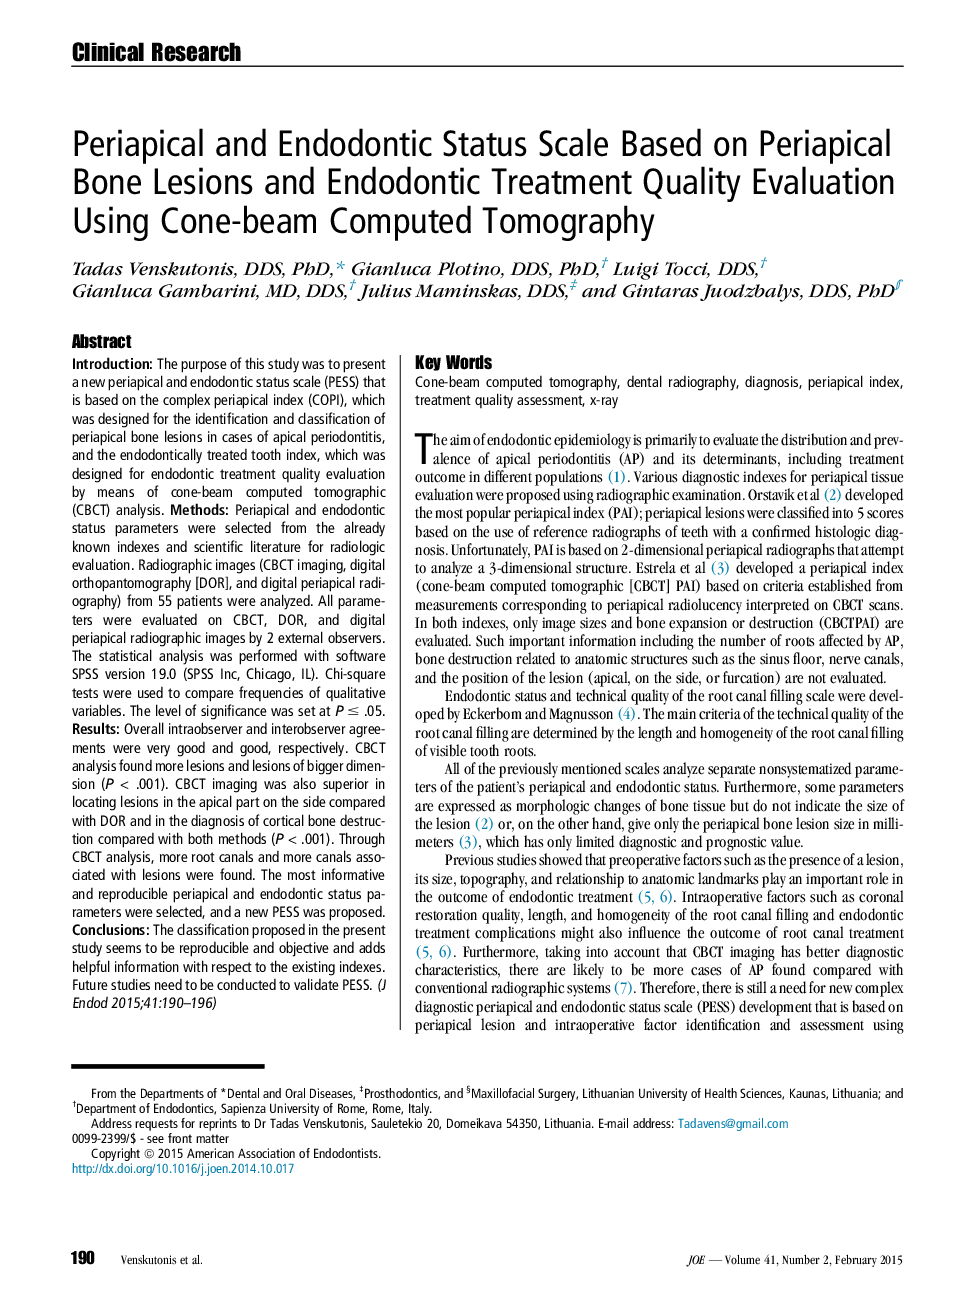 Periapical and Endodontic Status Scale Based on Periapical Bone Lesions and Endodontic Treatment Quality Evaluation Using Cone-beam Computed Tomography